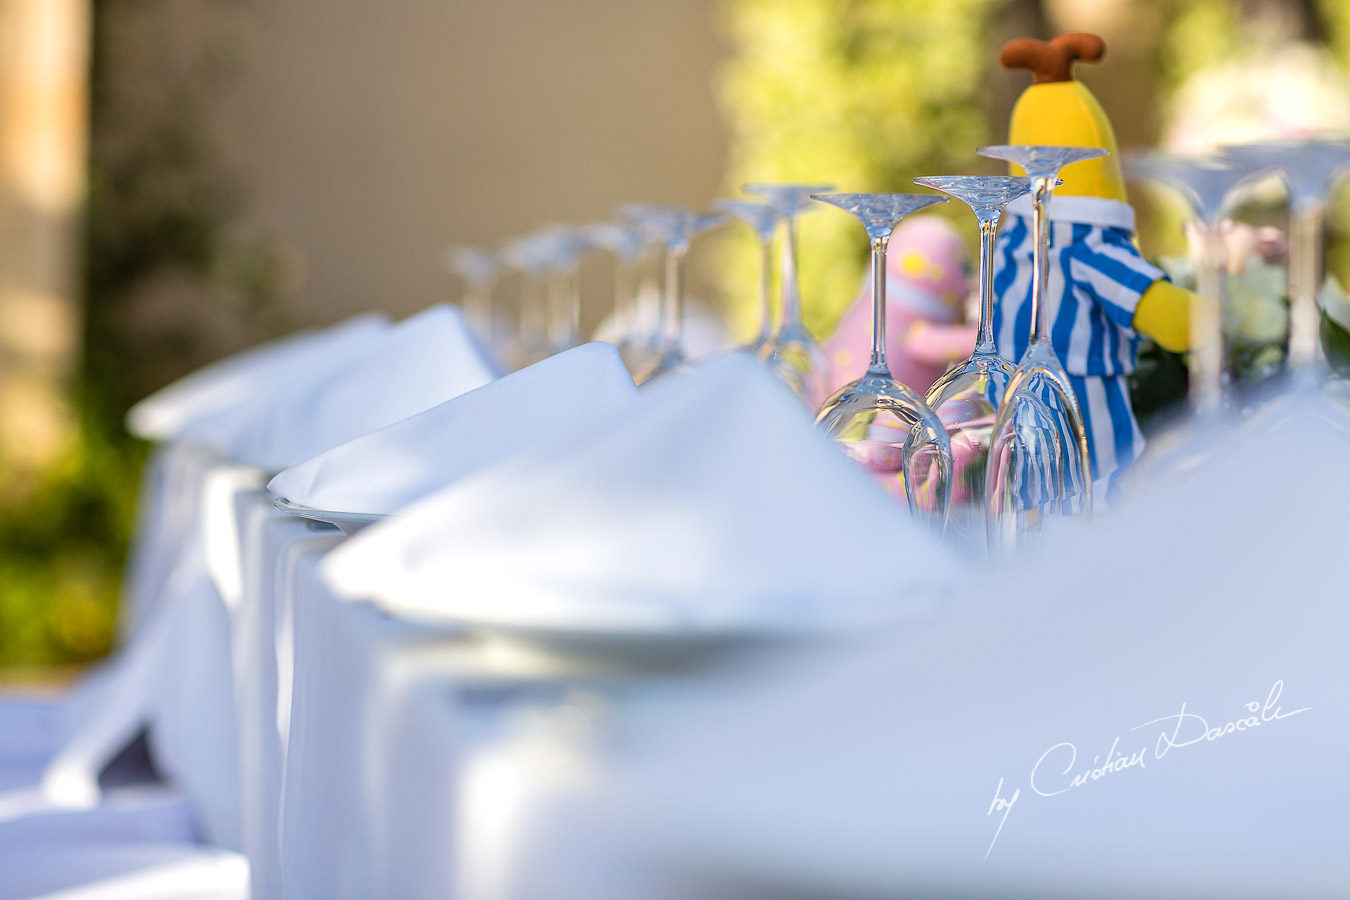 Beautiful wedding table decorations captured by Cristian Dascalu at a wedding at The Aphrodite Hills Resort in Paphos, Cyprus.